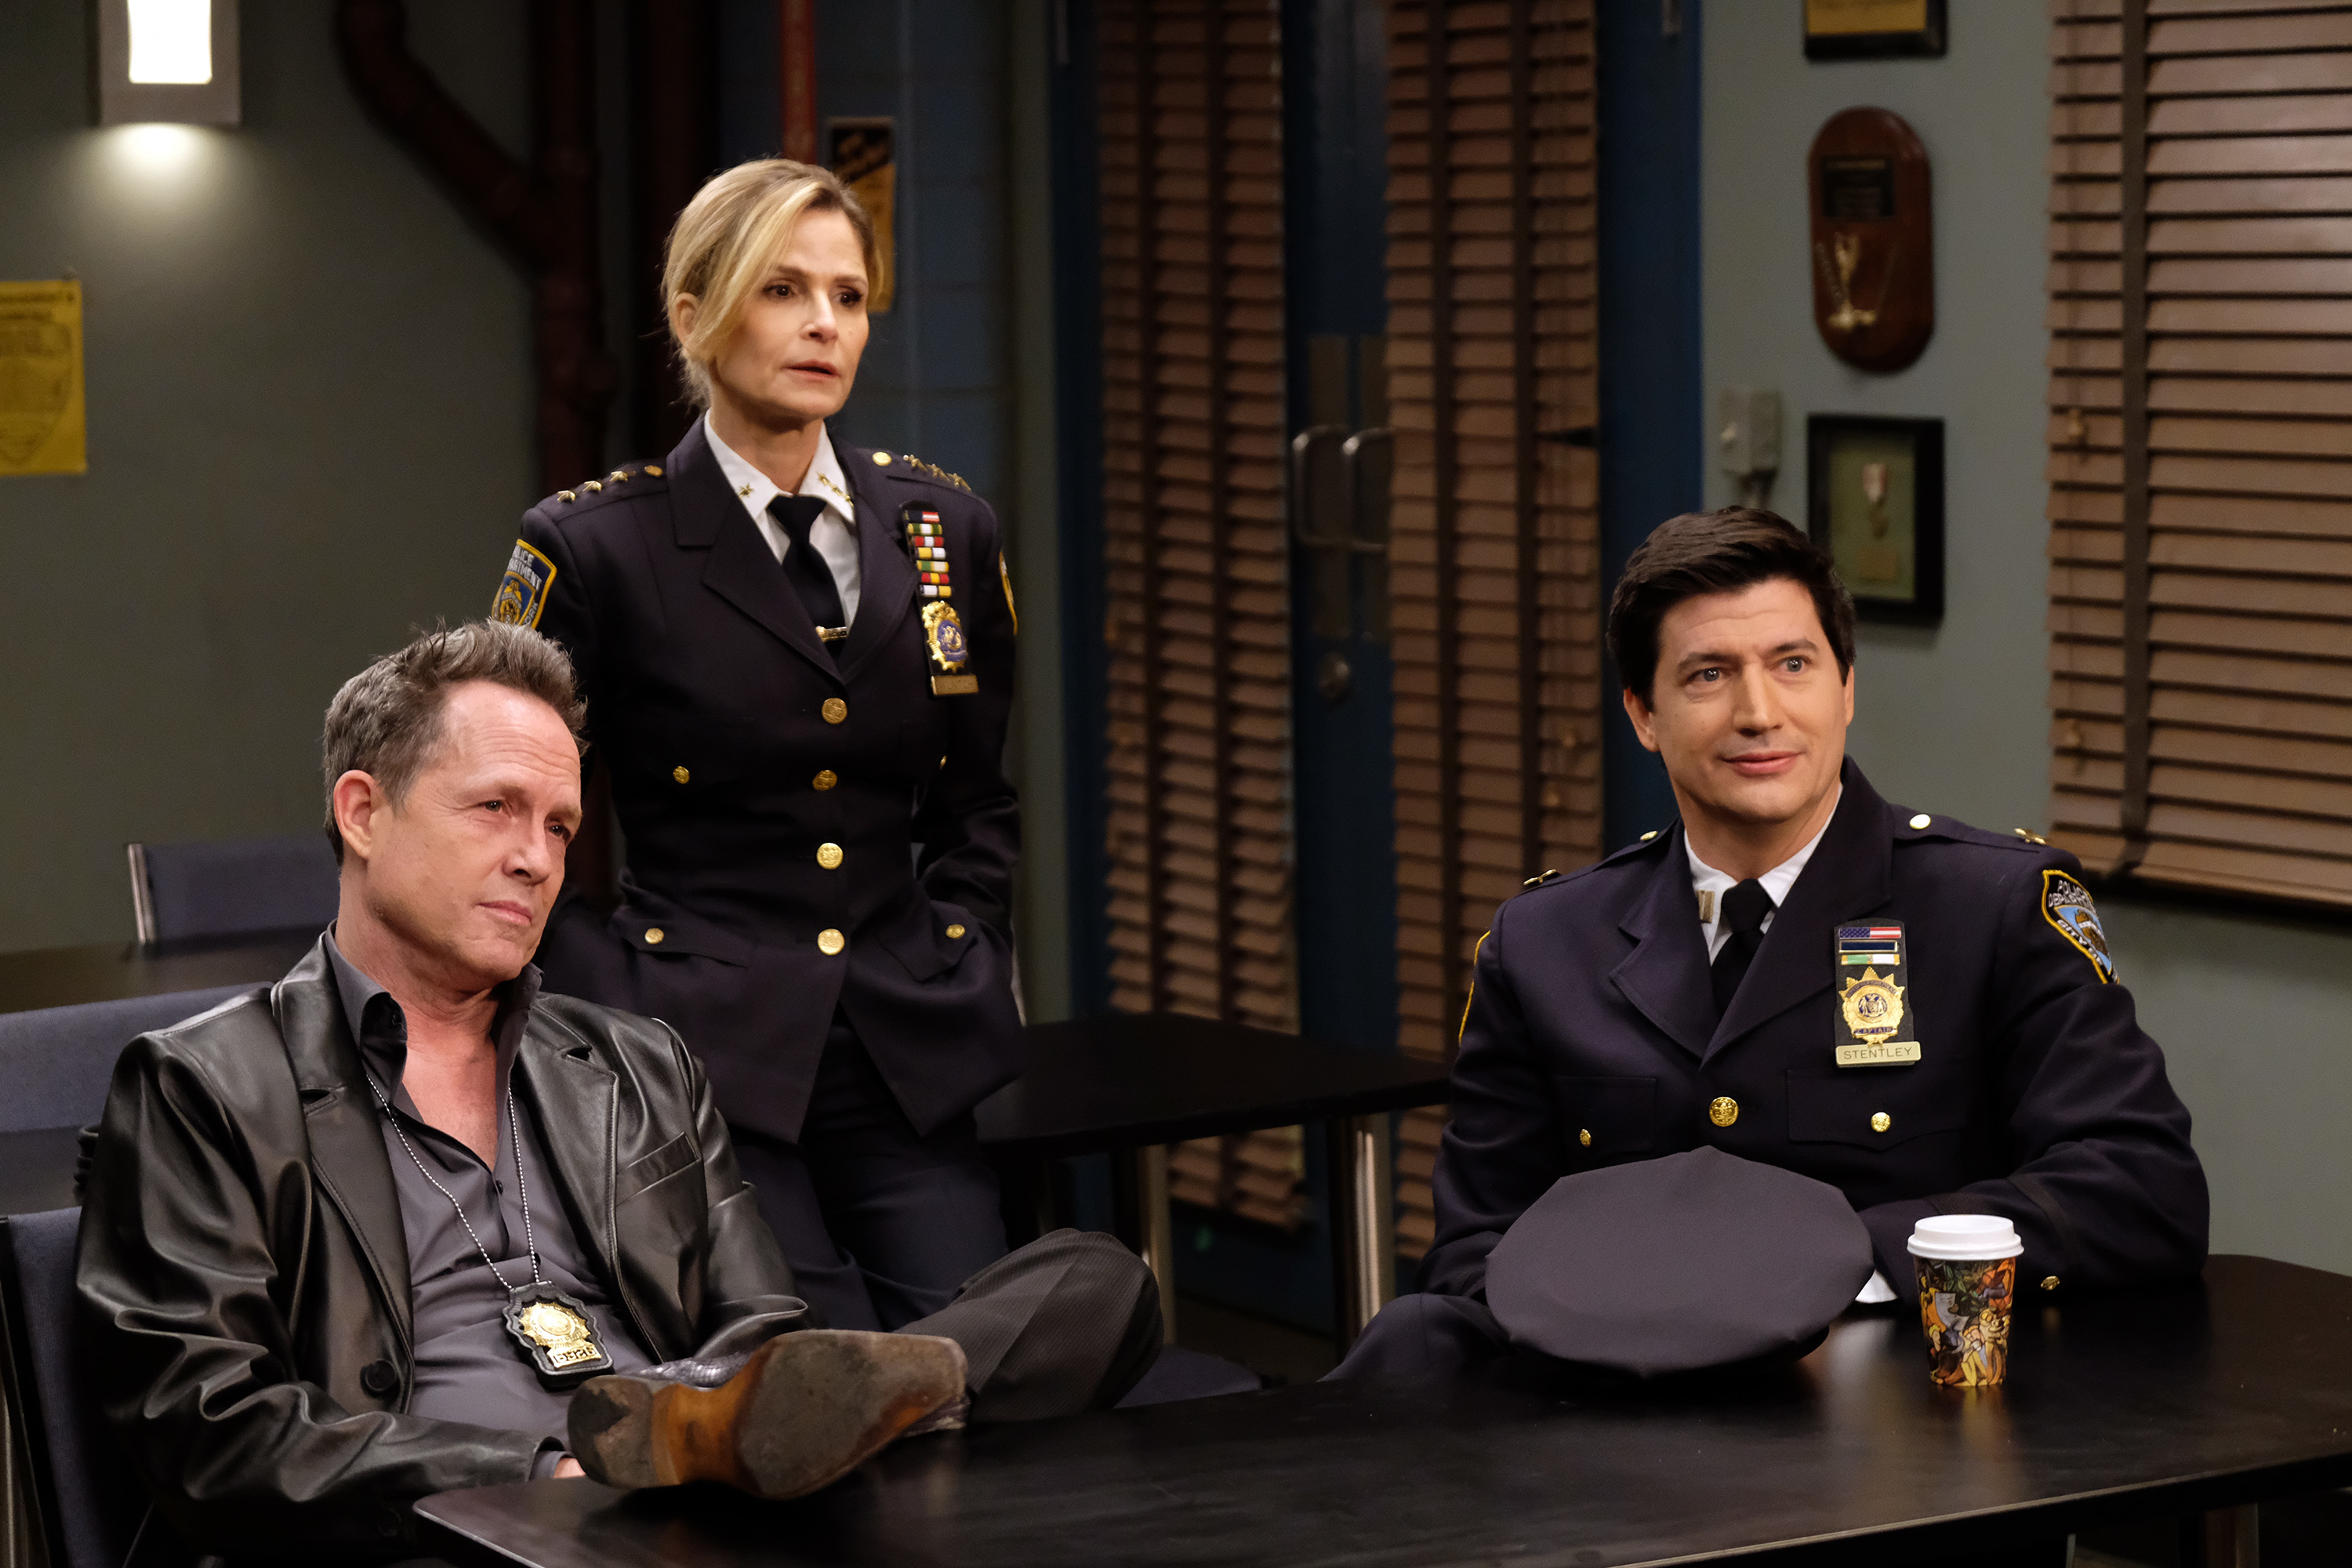 Dean Winters, Kyra Sedgwick and Ken Marino gather around a table